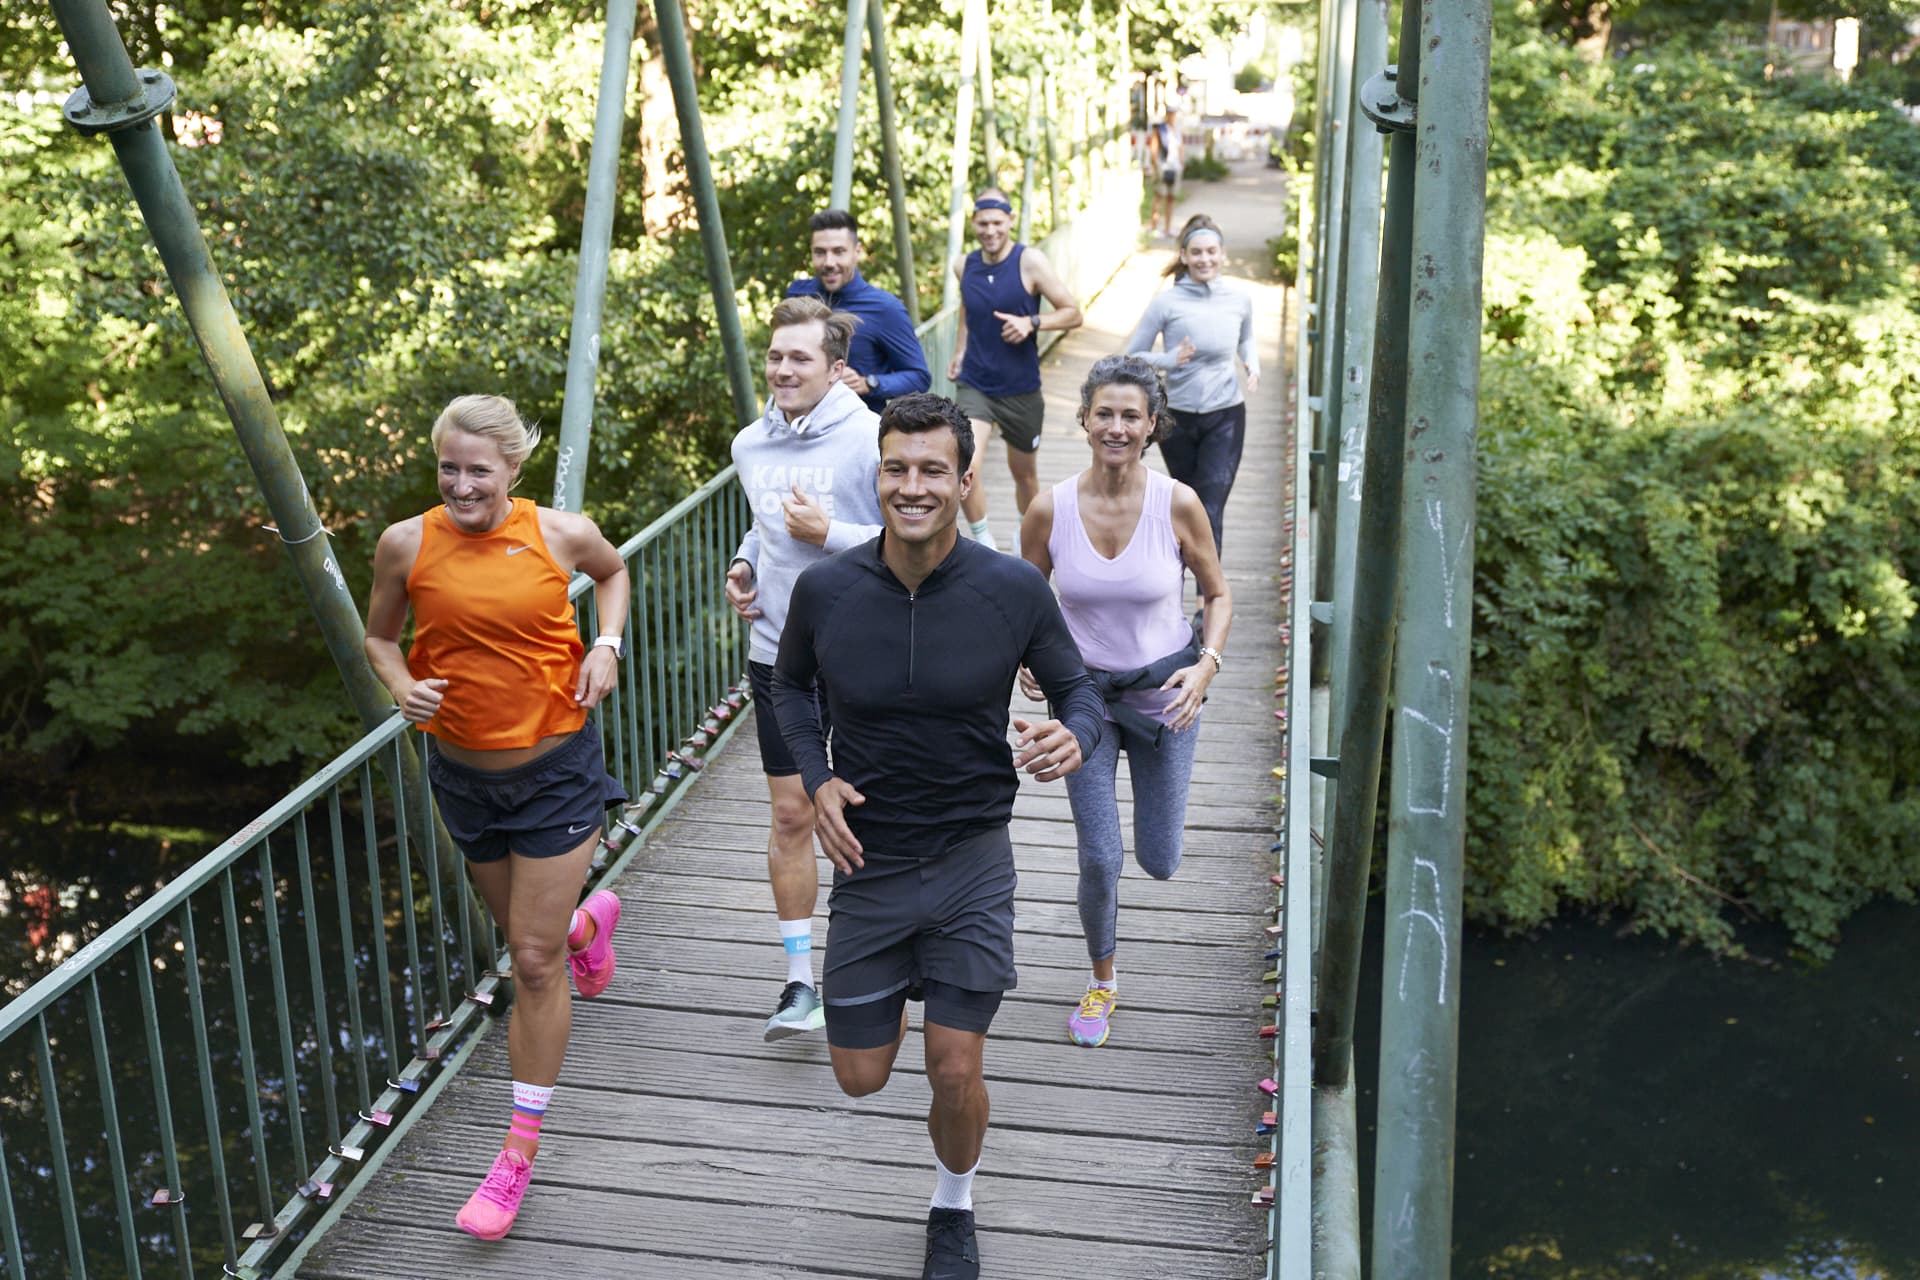 A group of runners training on a bridge